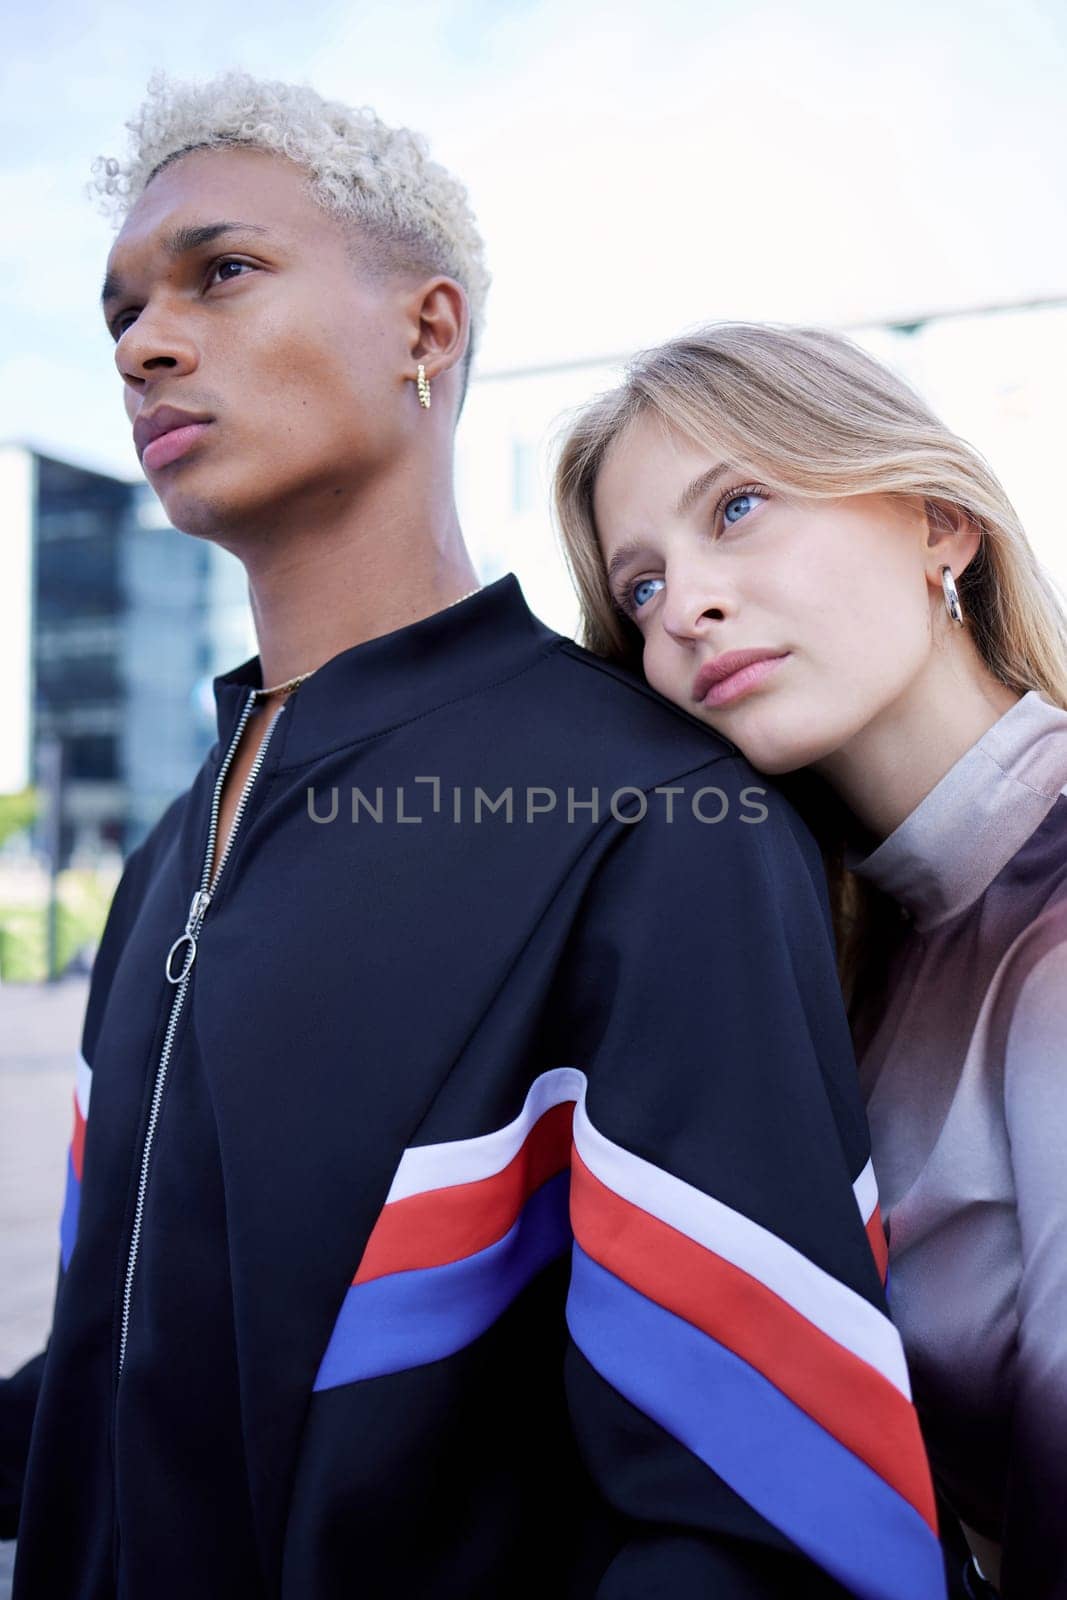 Couple love, serious and street fashion modern gen z or edgy millennial style in city together. Young man and woman, diverse fashionable friends and cool trendy youth outdoor designer wear lifestyle by YuriArcurs